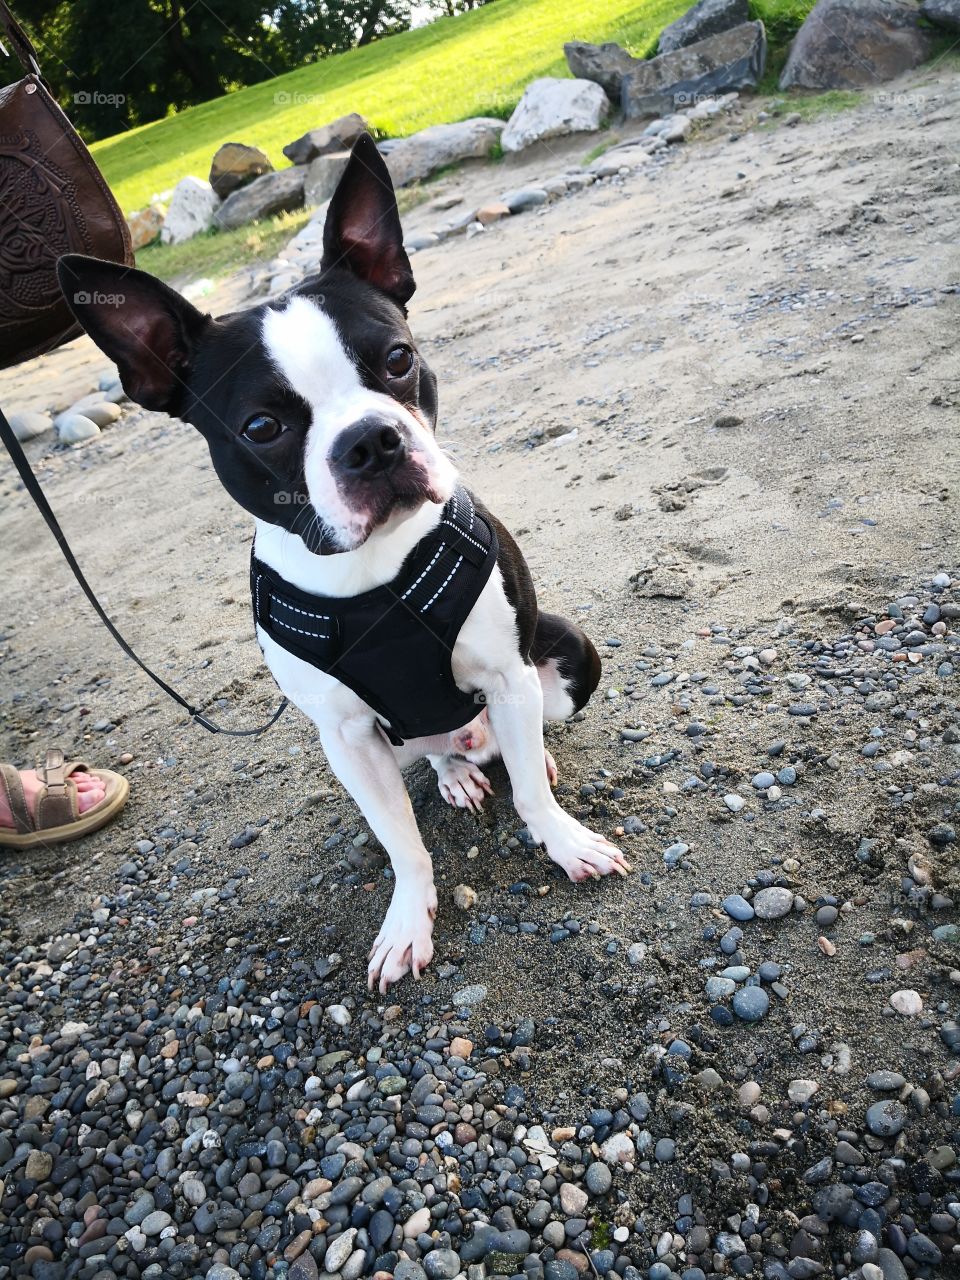 bozo the Boston Terrier enjoying the park and watching his favorite kids play.